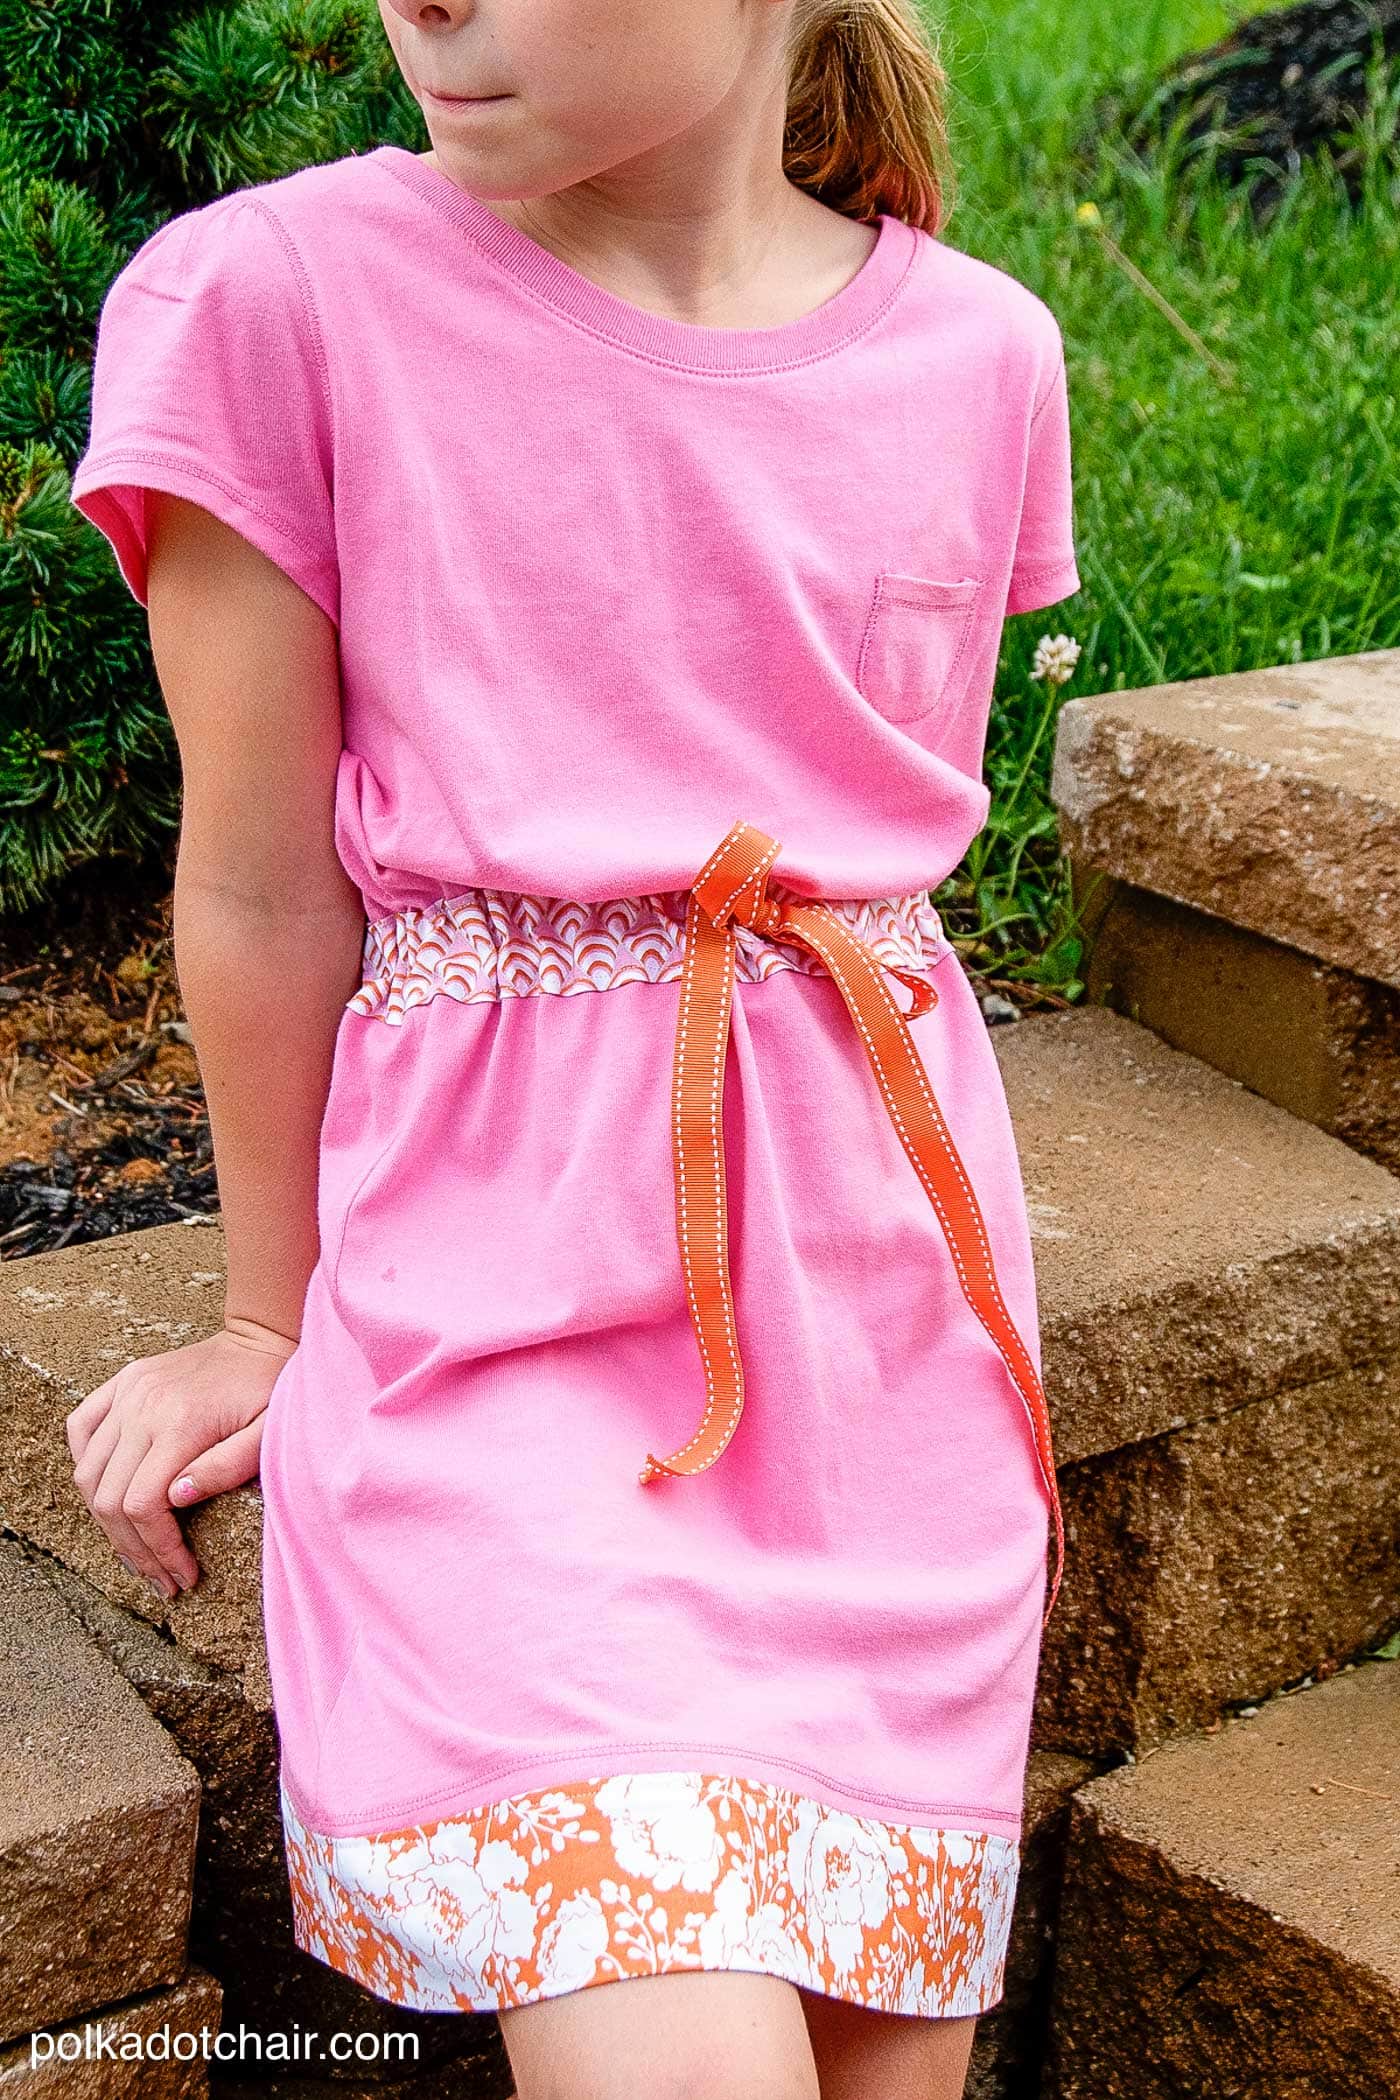 Quick and cute DIY t-shirt dress: How to turn a t-shirt into a dress (2T-14  sizes) - Elizabeth Made This